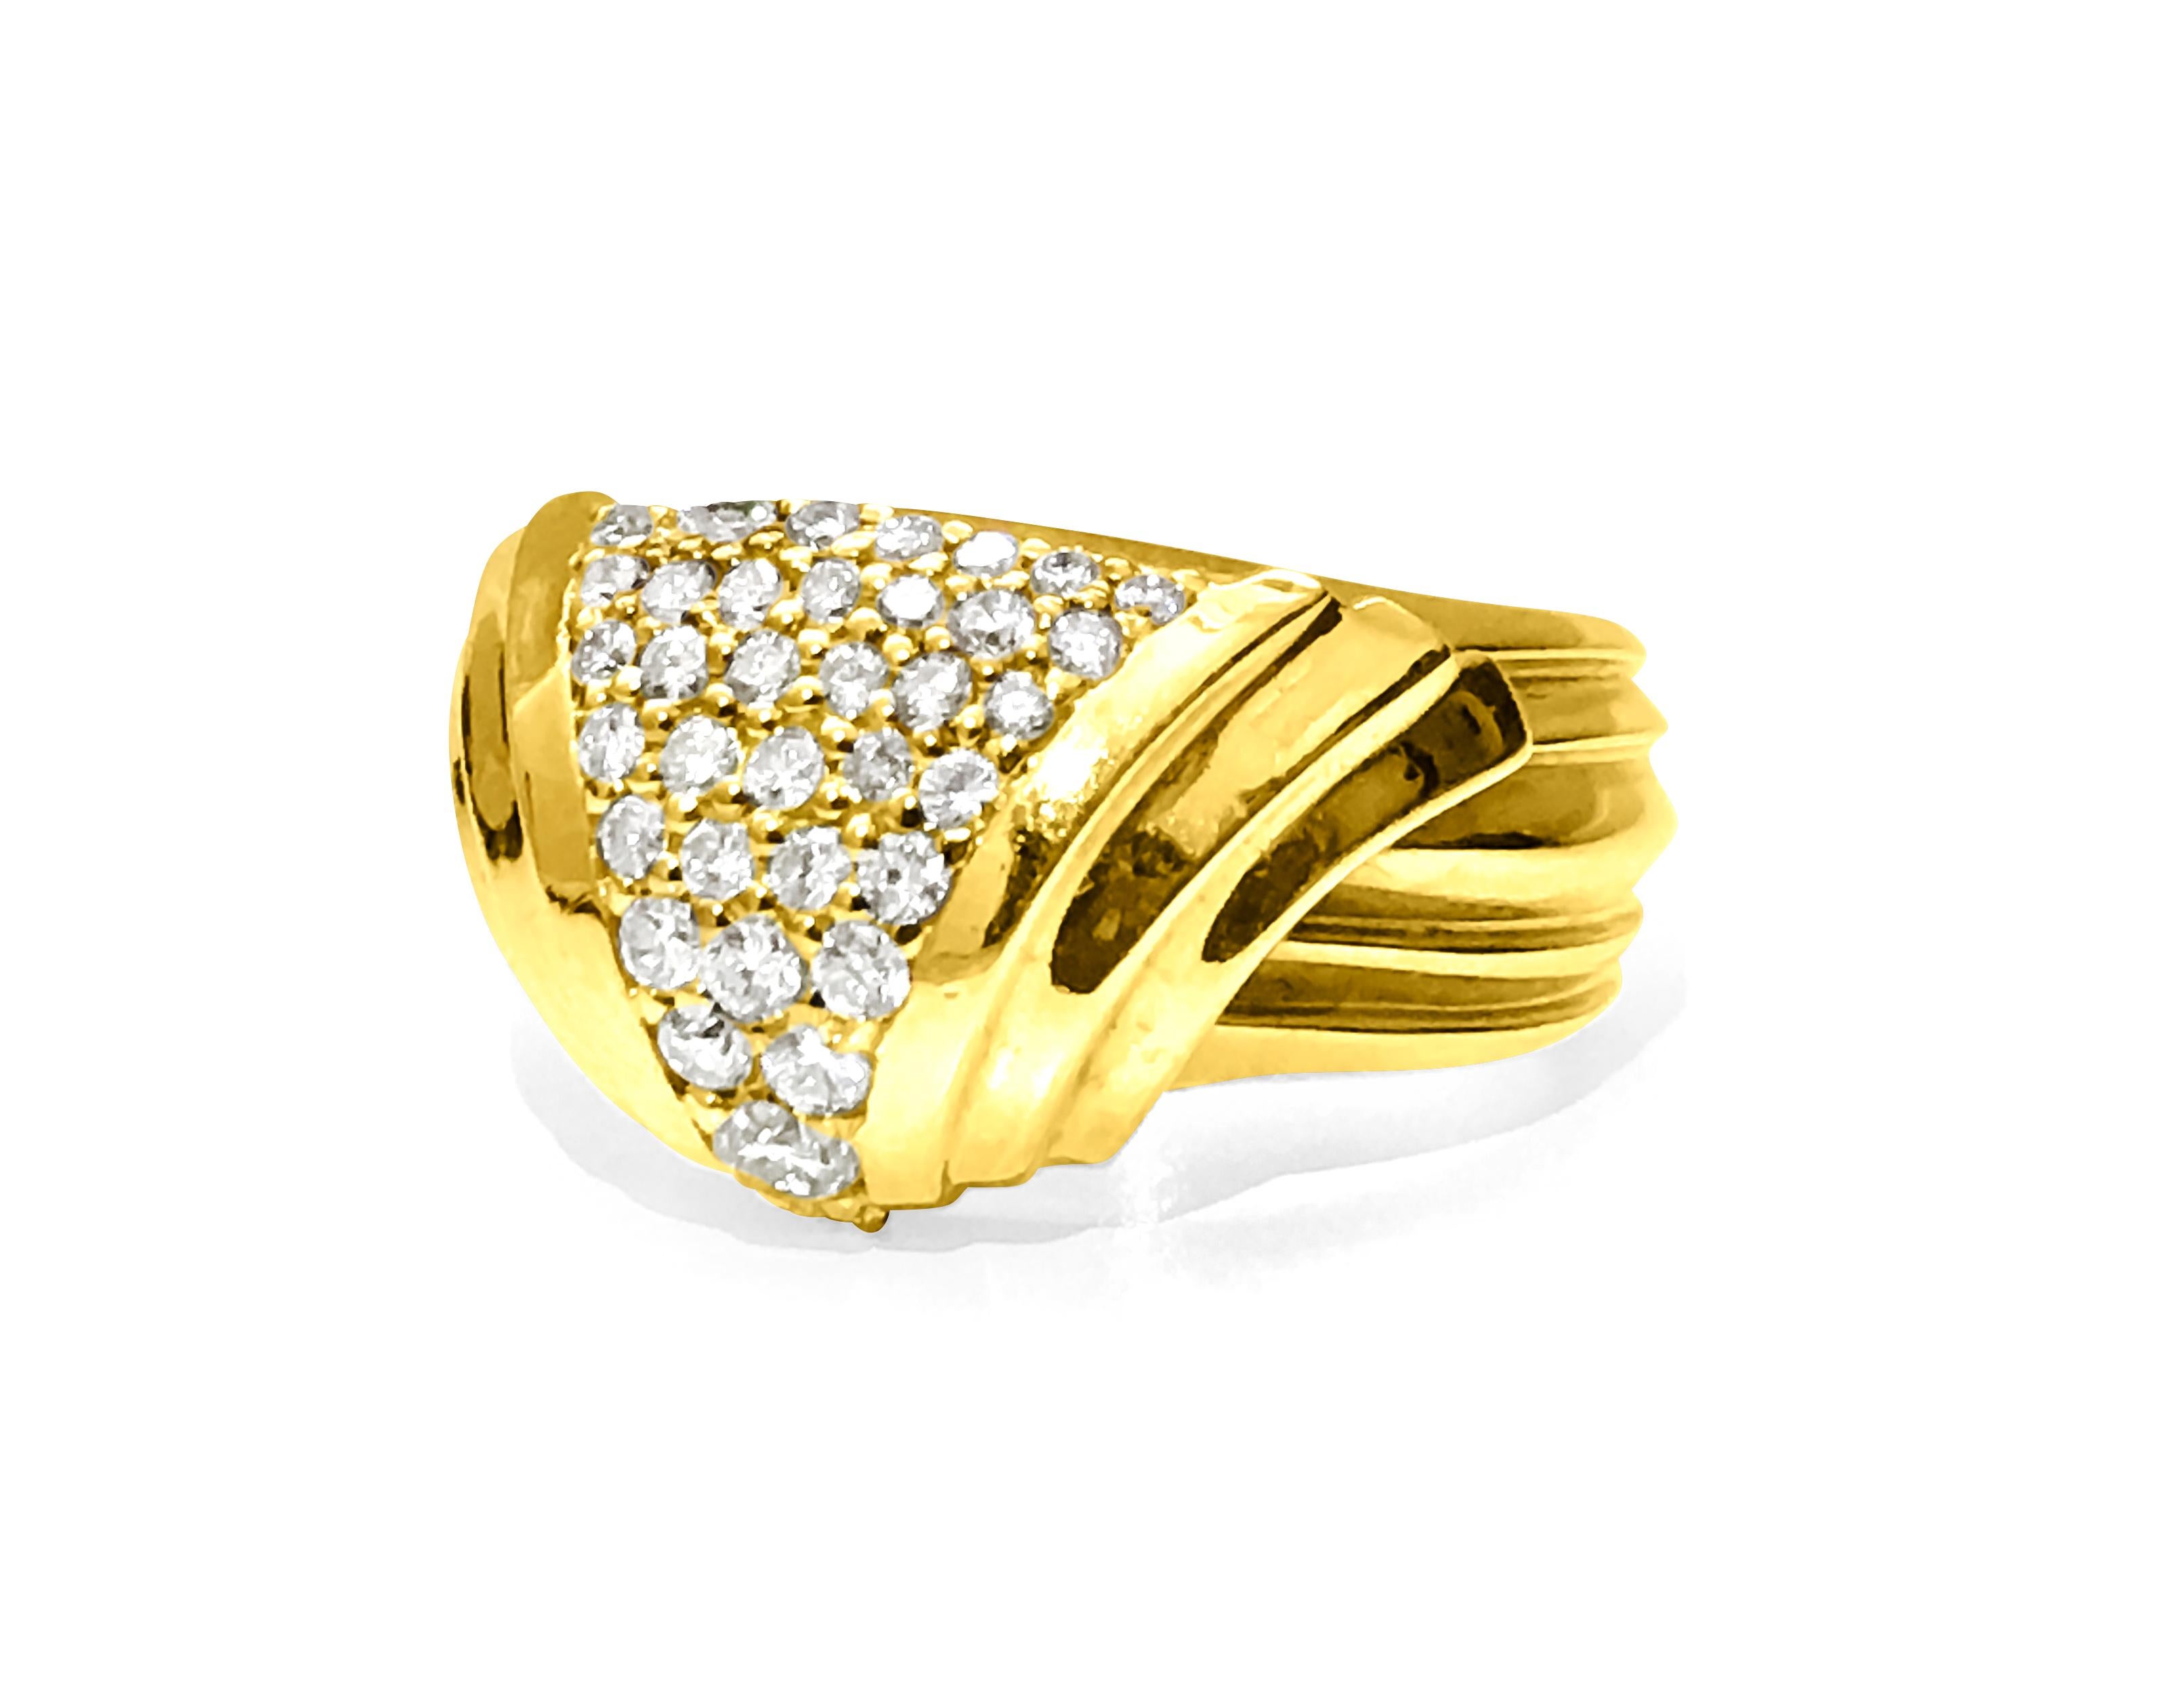 Metal: 18K Yellow Gold.
Total weight: 15.40 Grams. 
TCW of diamonds: 1.10 cts.
VVS clarity and F-G color. All stones set in shared prong setting. 

Custom made unisex yellow gold and diamond ring. Art deco Style and vintage style diamond ring.